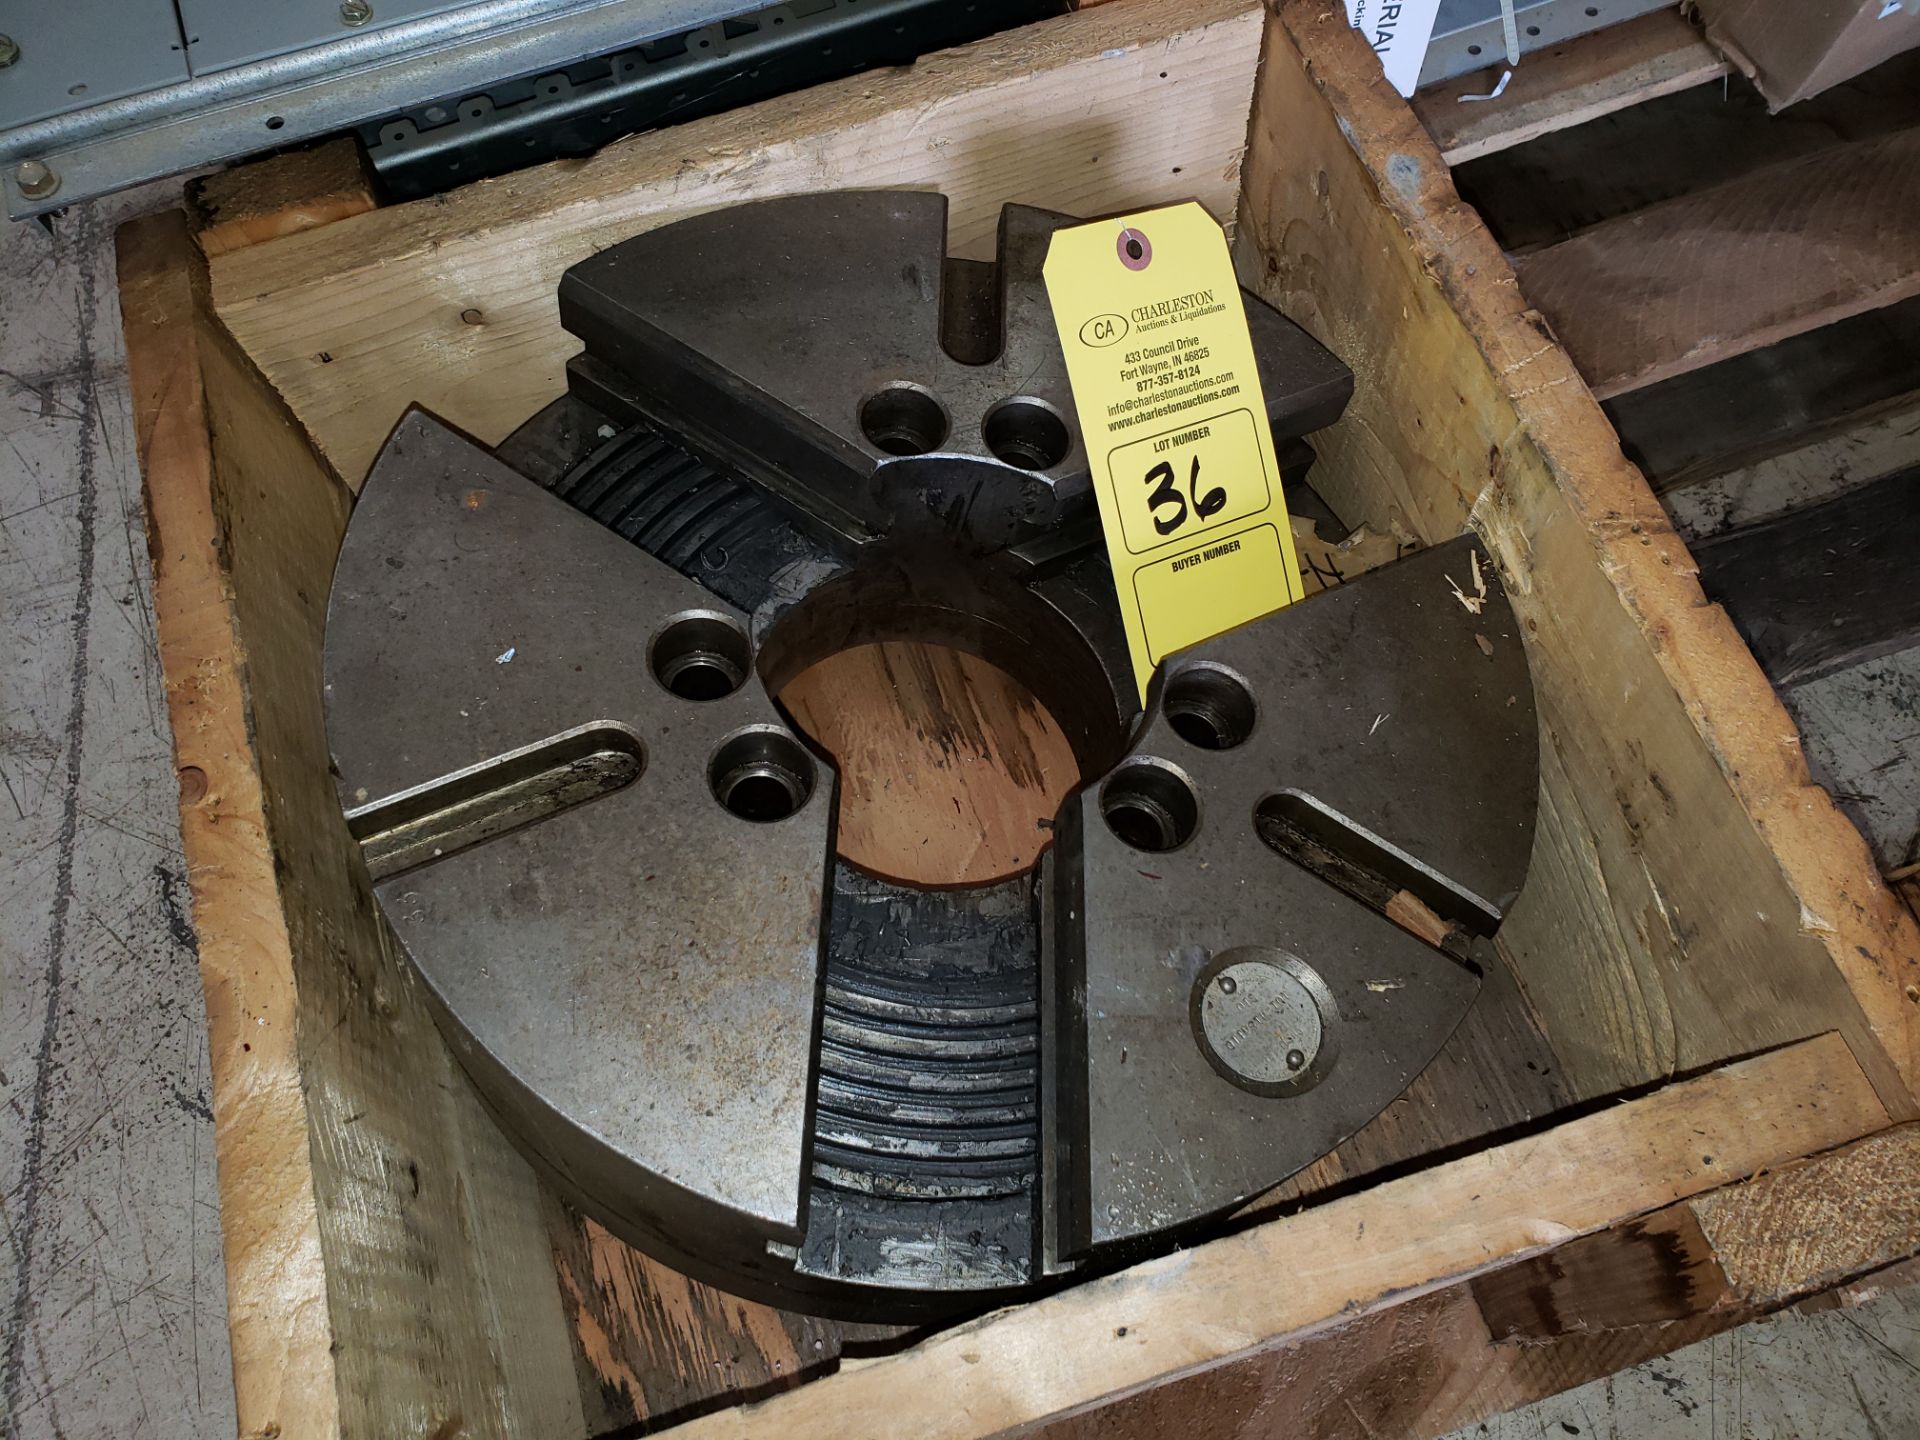 15" CUSHMAN 3-JAW CHUCK W/ SELF CENTERING SPINDLE P/N 10-124-15 ALL (LOCATED AT 432 COUNCIL DRIVE